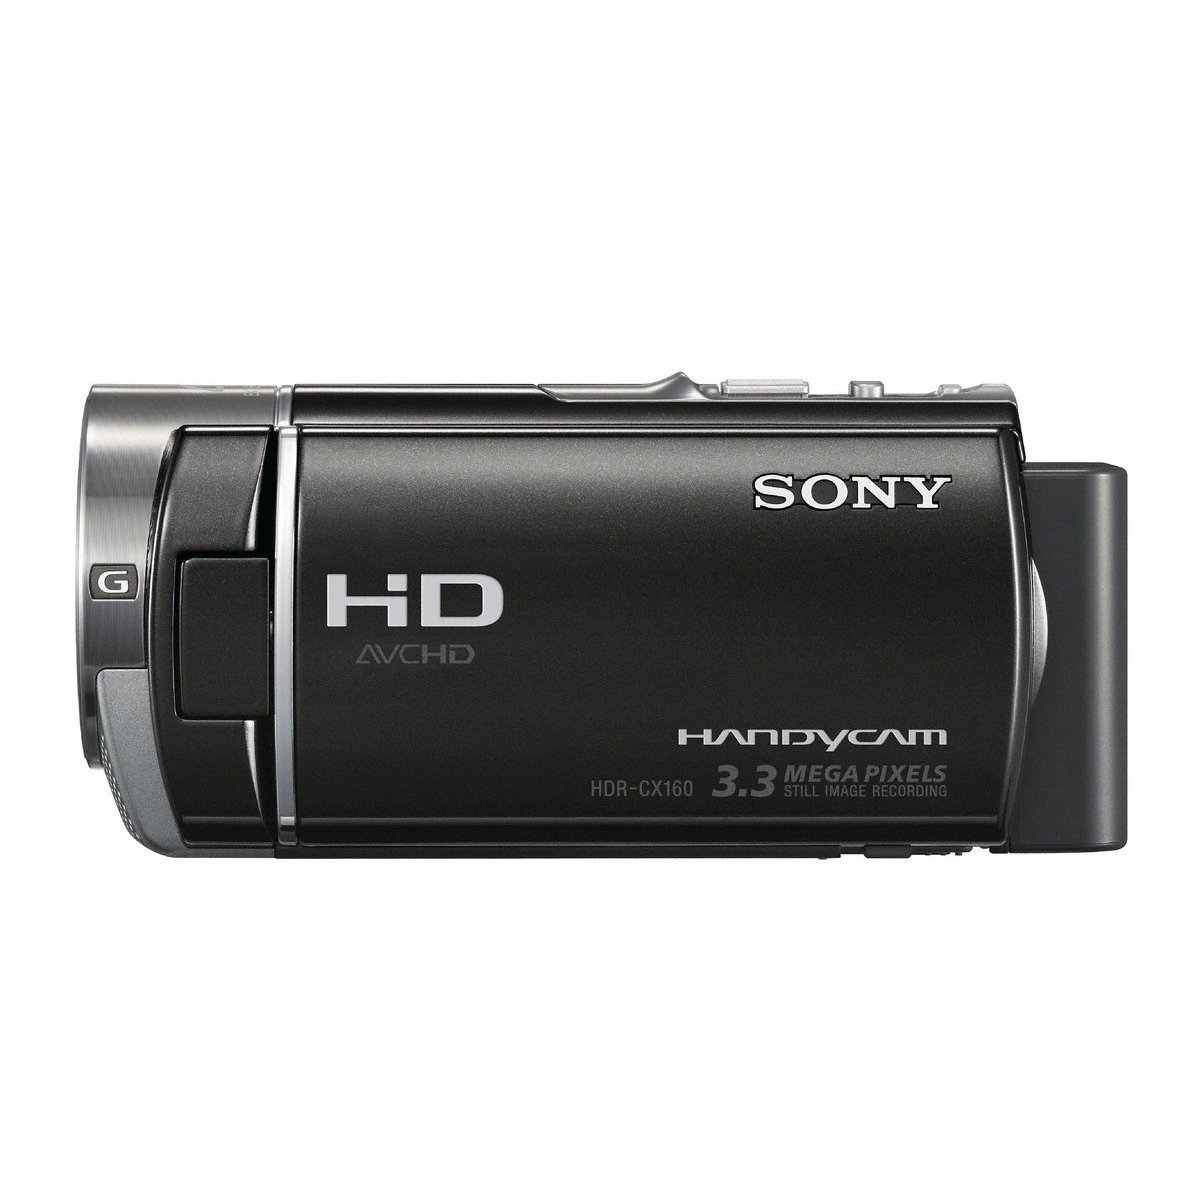 http://thetechjournal.com/wp-content/uploads/images/1110/1319908828-sony-hdrcx160-highdefinition-handycam-camcorder--3.jpg